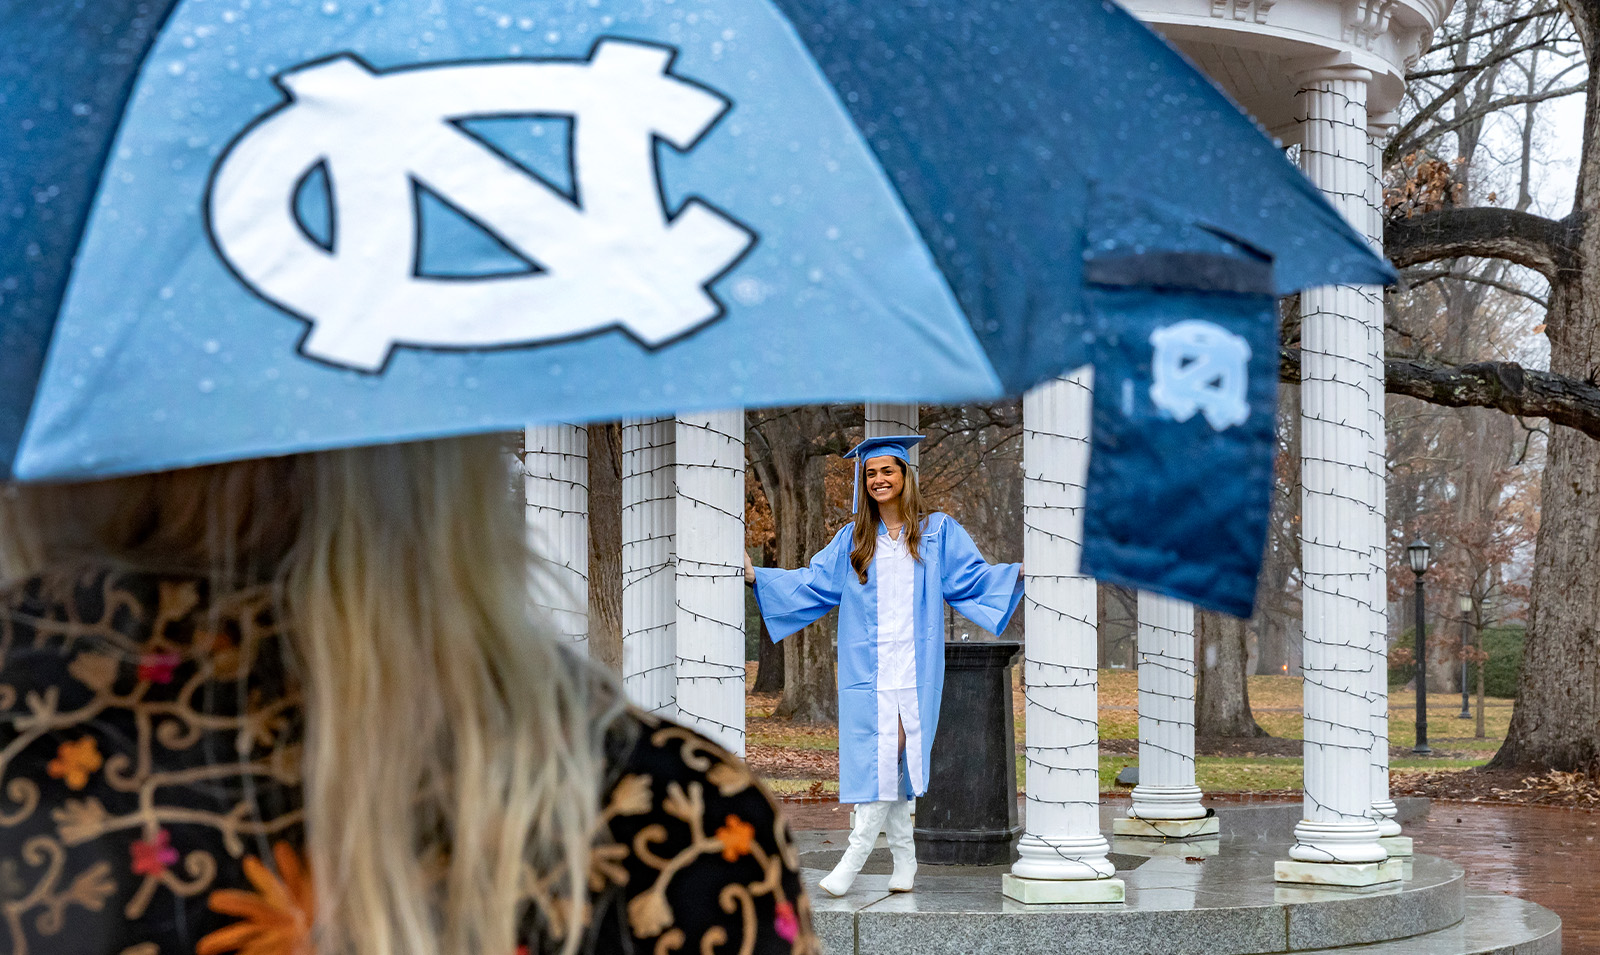 A graduate posing for a photo at the Old Well on the campus of UNC-Chapel Hill on a rainy Sunday, the day of Winter Commencement. In the foreground is a man holding a Carolina Blue and white umbrella.